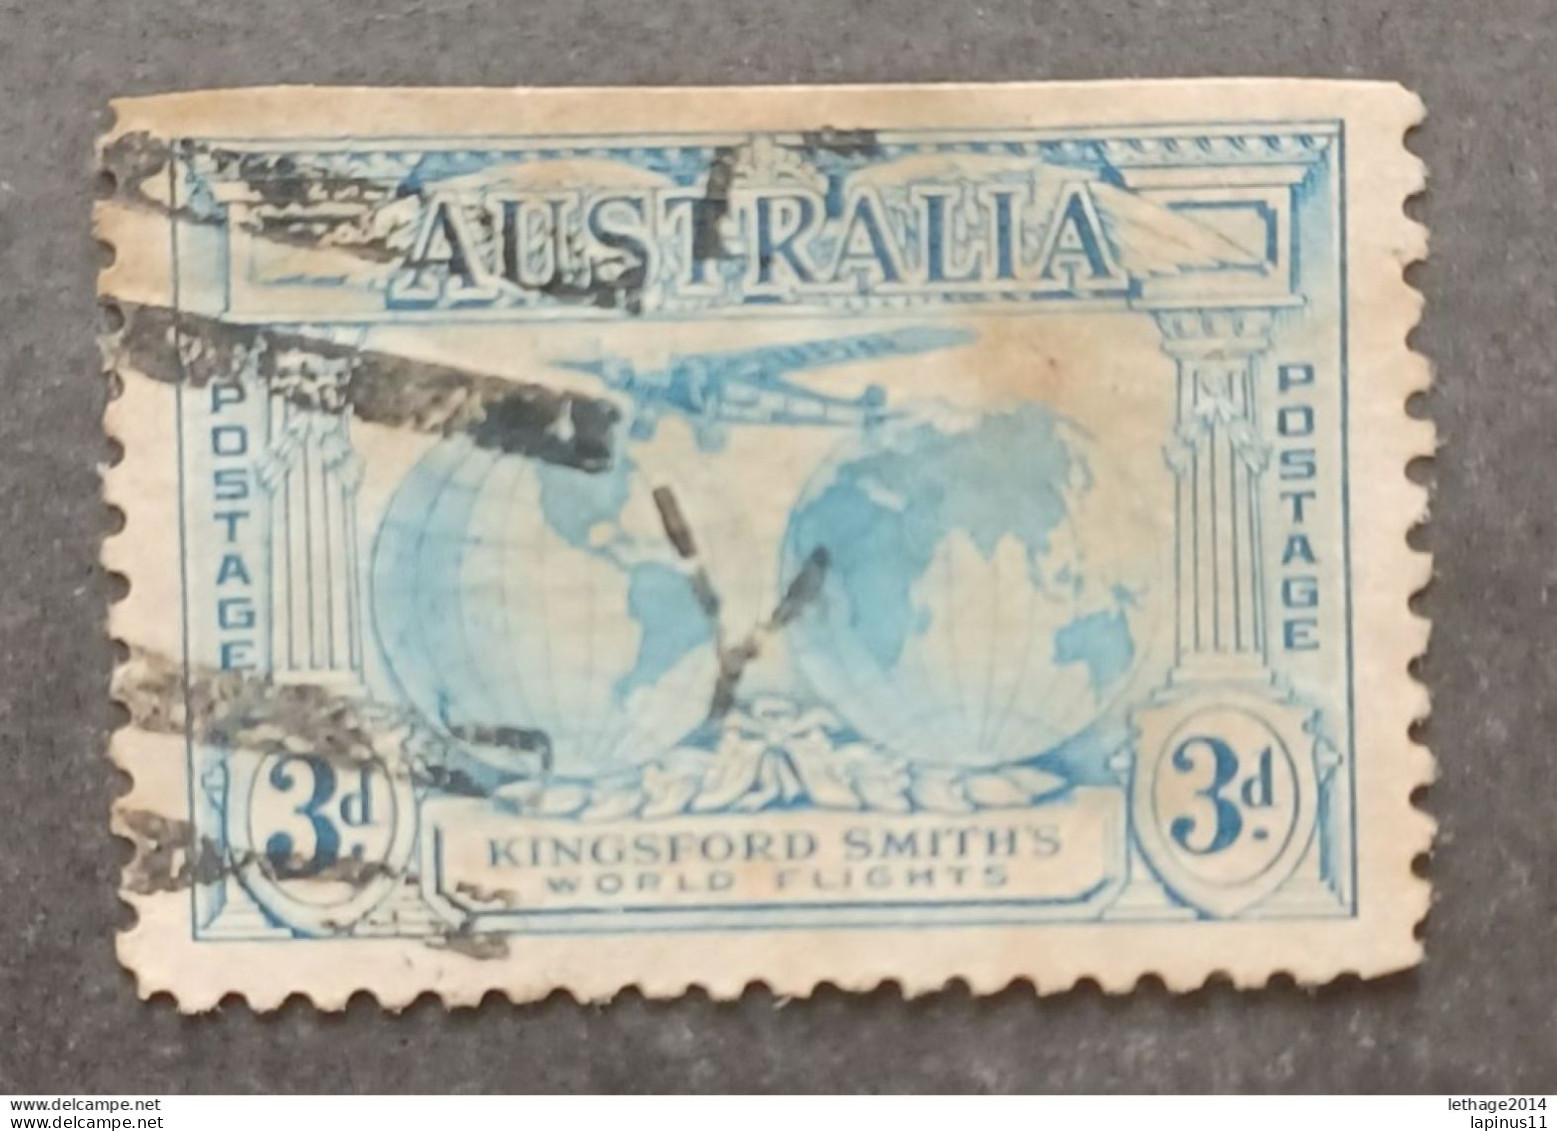 AUSTRALIA 1931 SOUTHERN CROSS OVER OF THE EMISPHERES SCOTT N 112 VARIETY SUPERIOR IMPERFORATE - Oblitérés